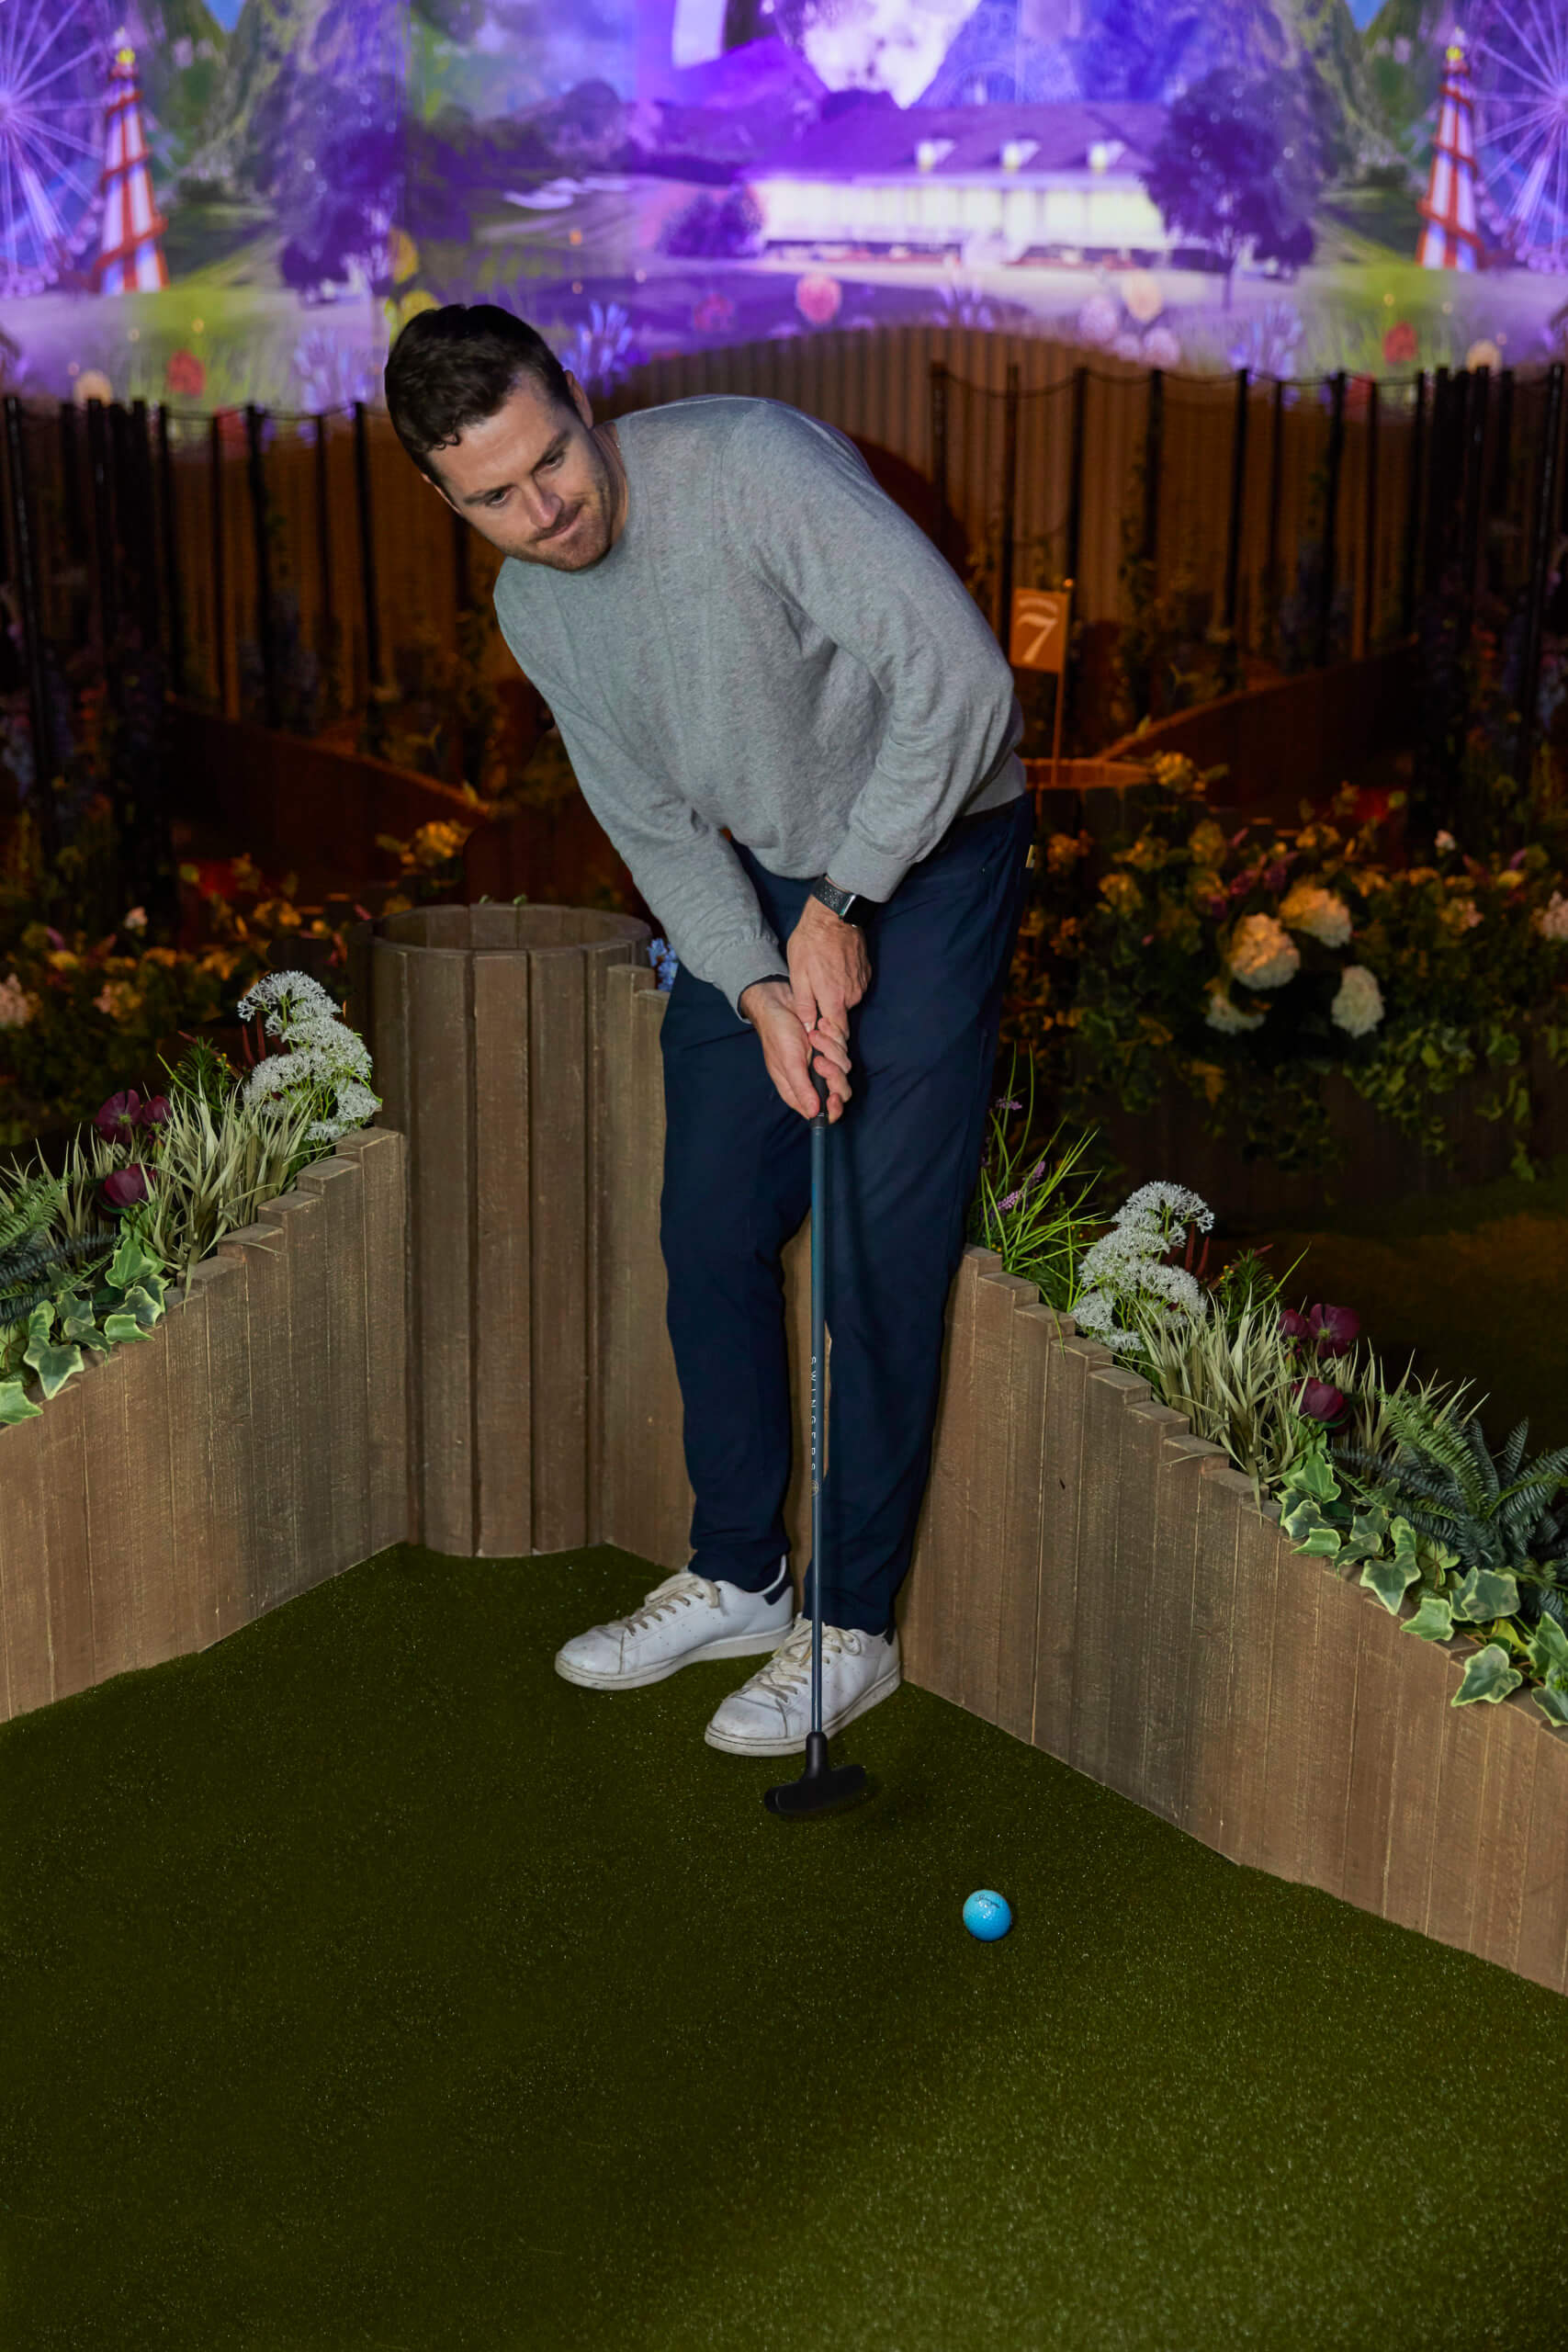 Swingers brings immersive mini golf experience to New York City with local fare and drinks amNewYork